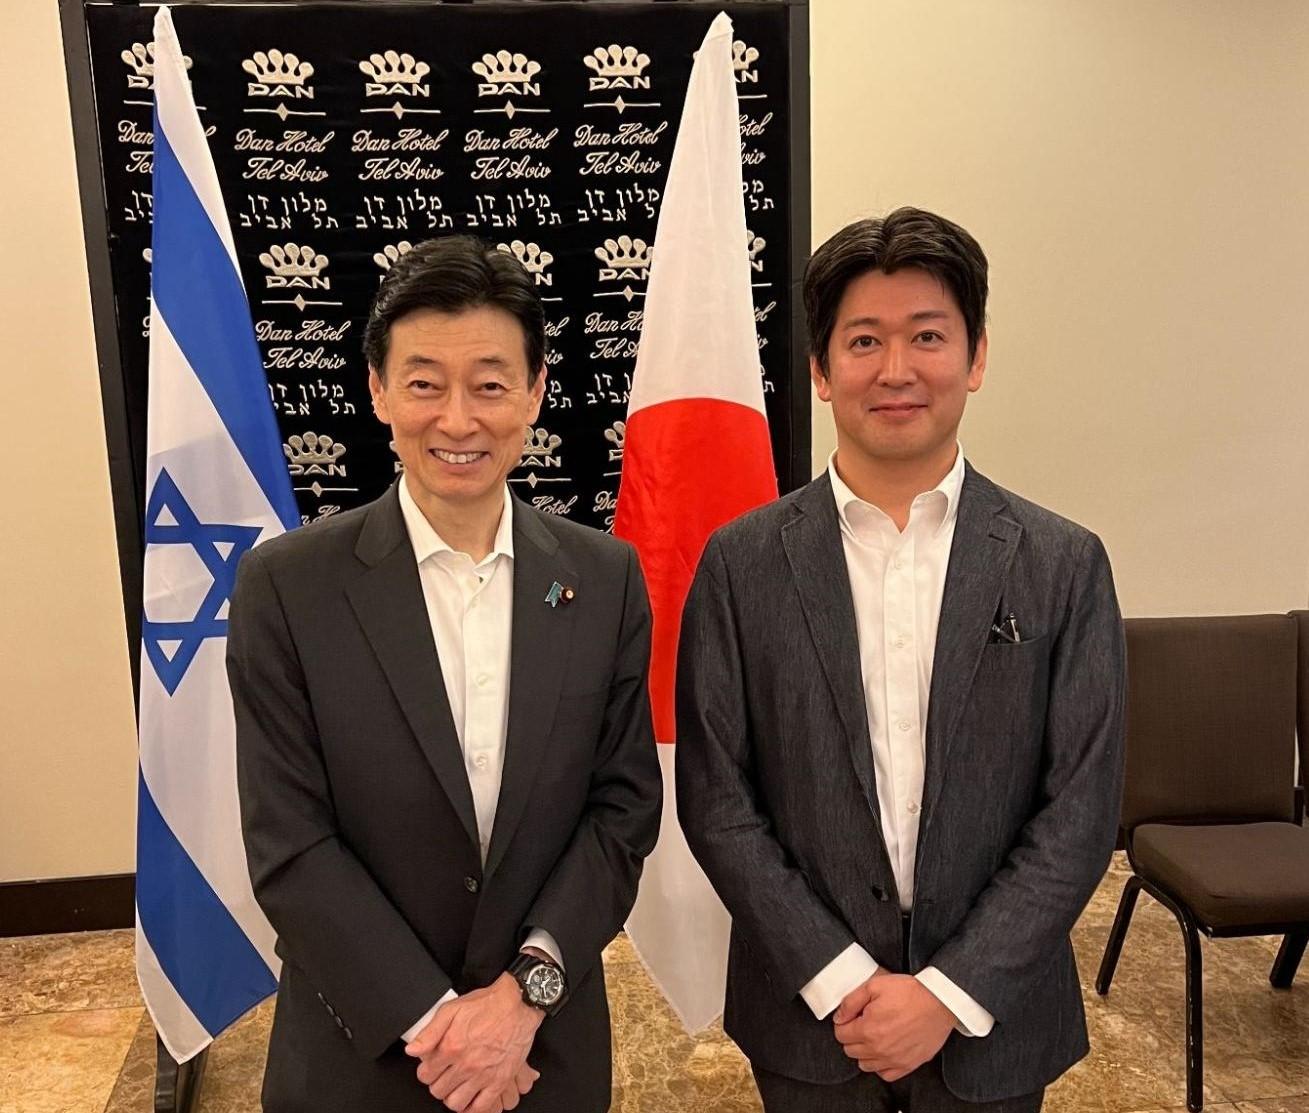 Participated in the Startup Mission to Israel by Minister of Economy, Trade and Industry Mr. Nishimura